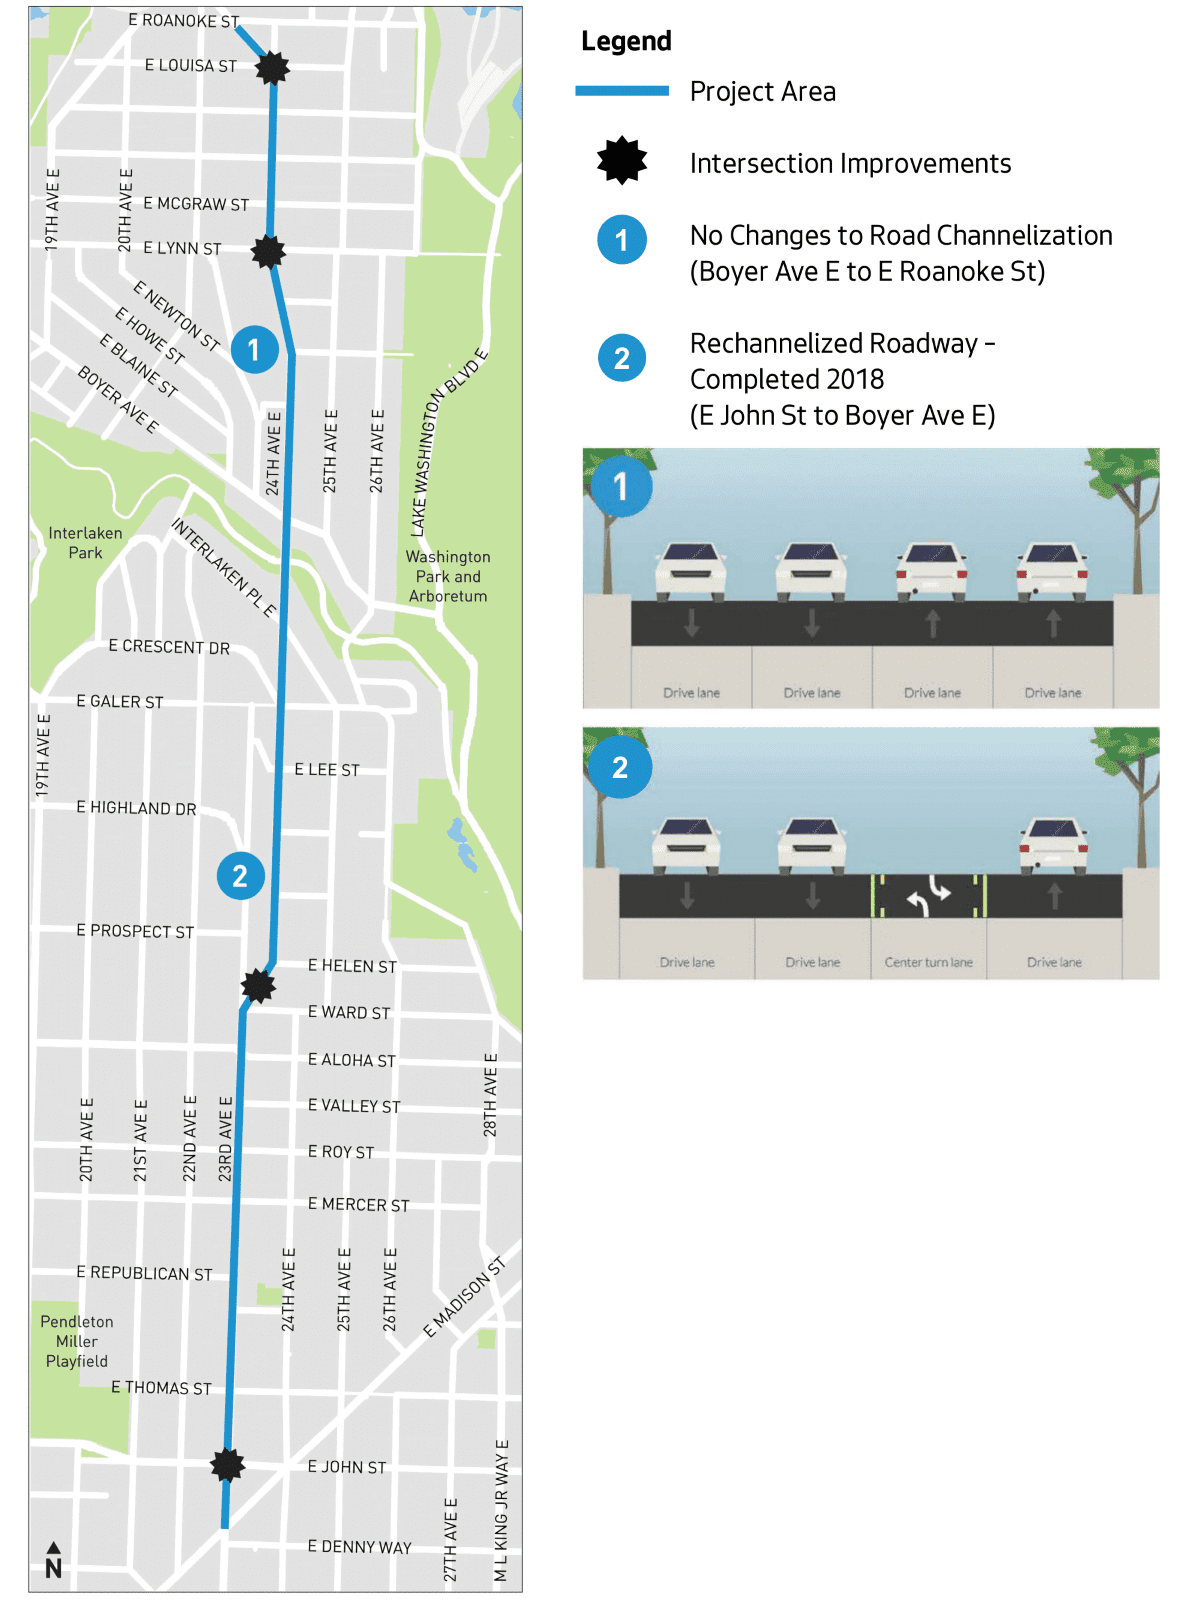 Project Map for 23rd Ave E Vision Zero Project in Montlake